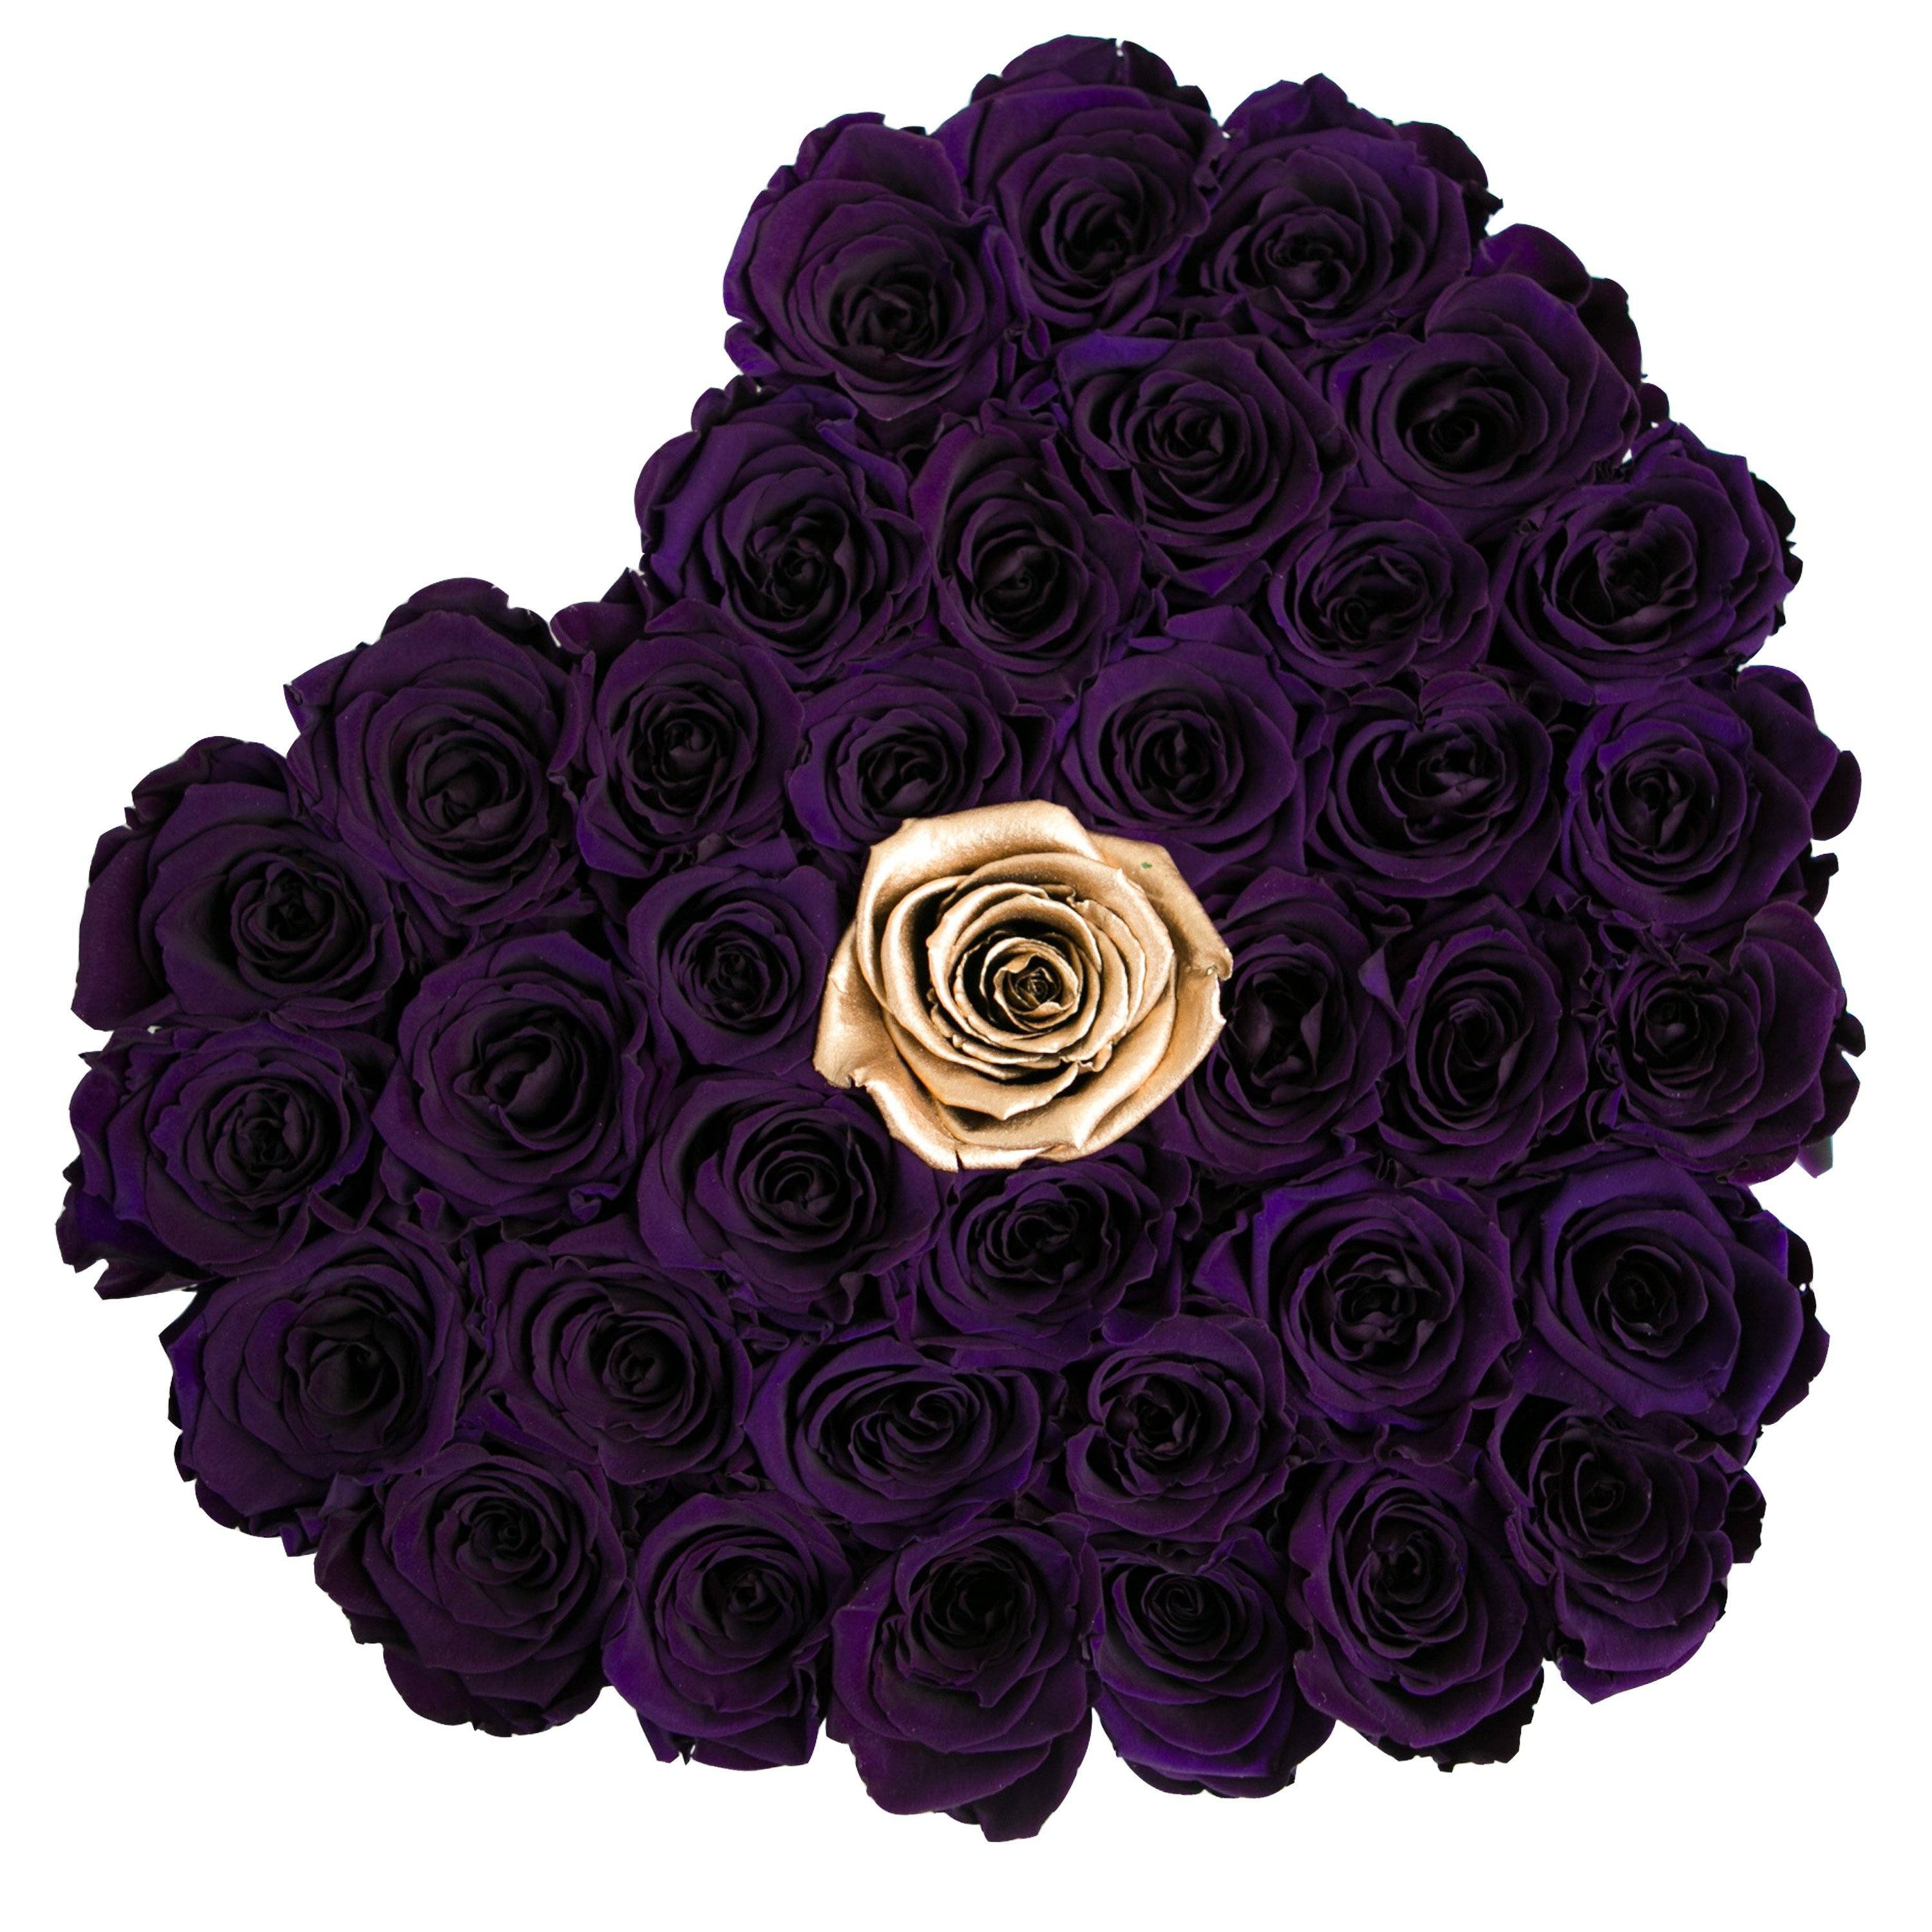 LOVE box - Beast2 - Limited Edition mixed eternity roses - the million roses